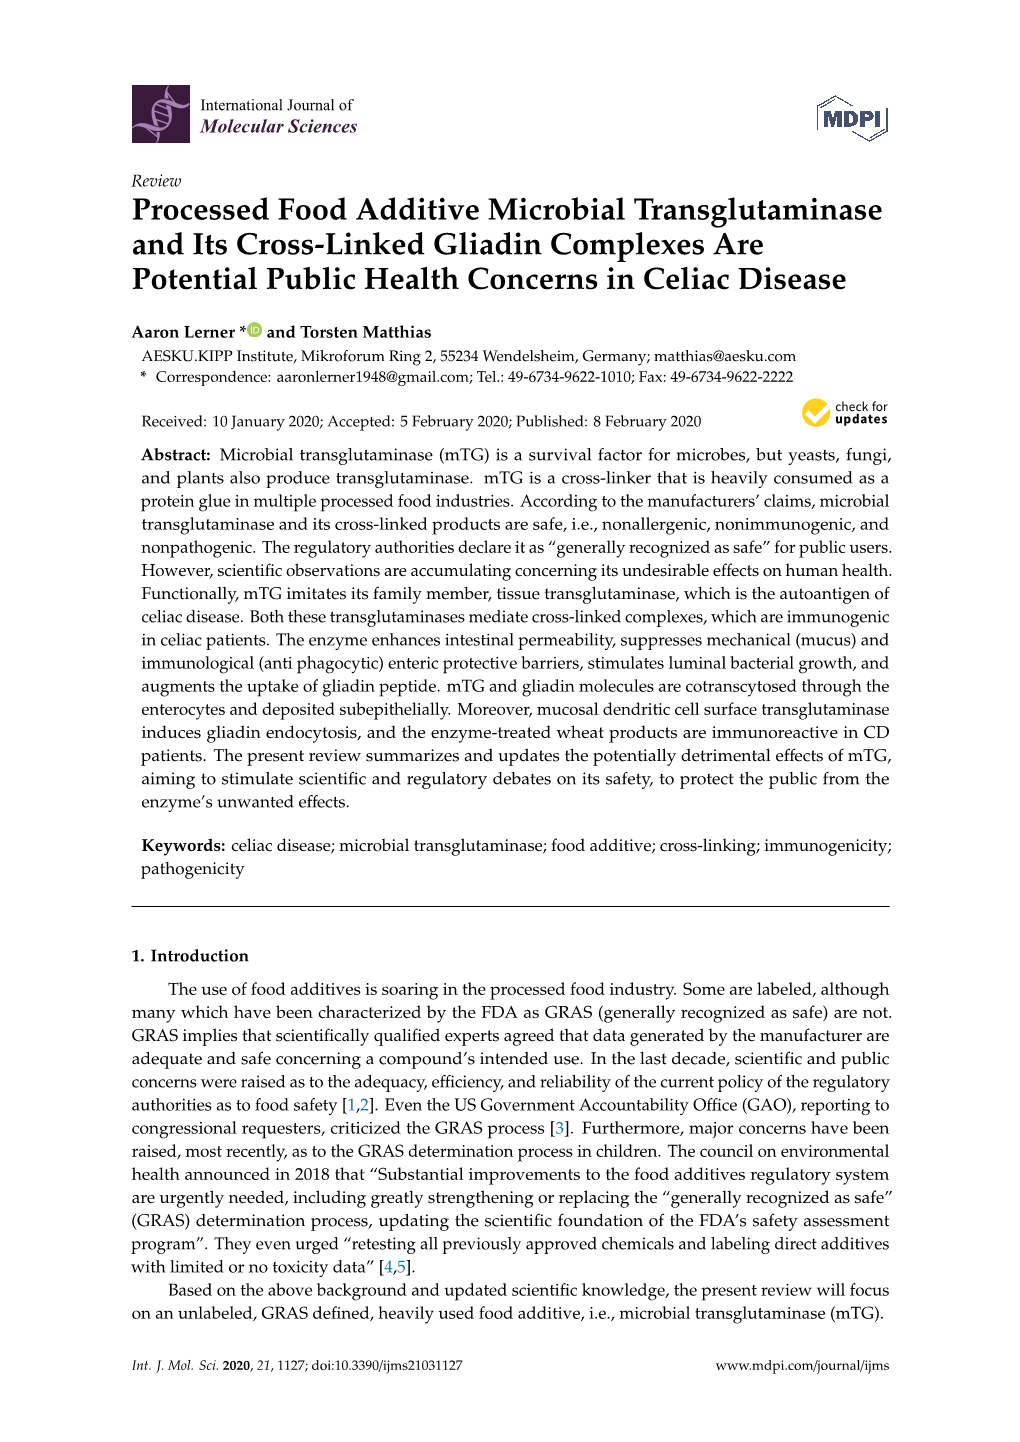 Processed Food Additive Microbial Transglutaminase and Its Cross-Linked Gliadin Complexes Are Potential Public Health Concerns in Celiac Disease